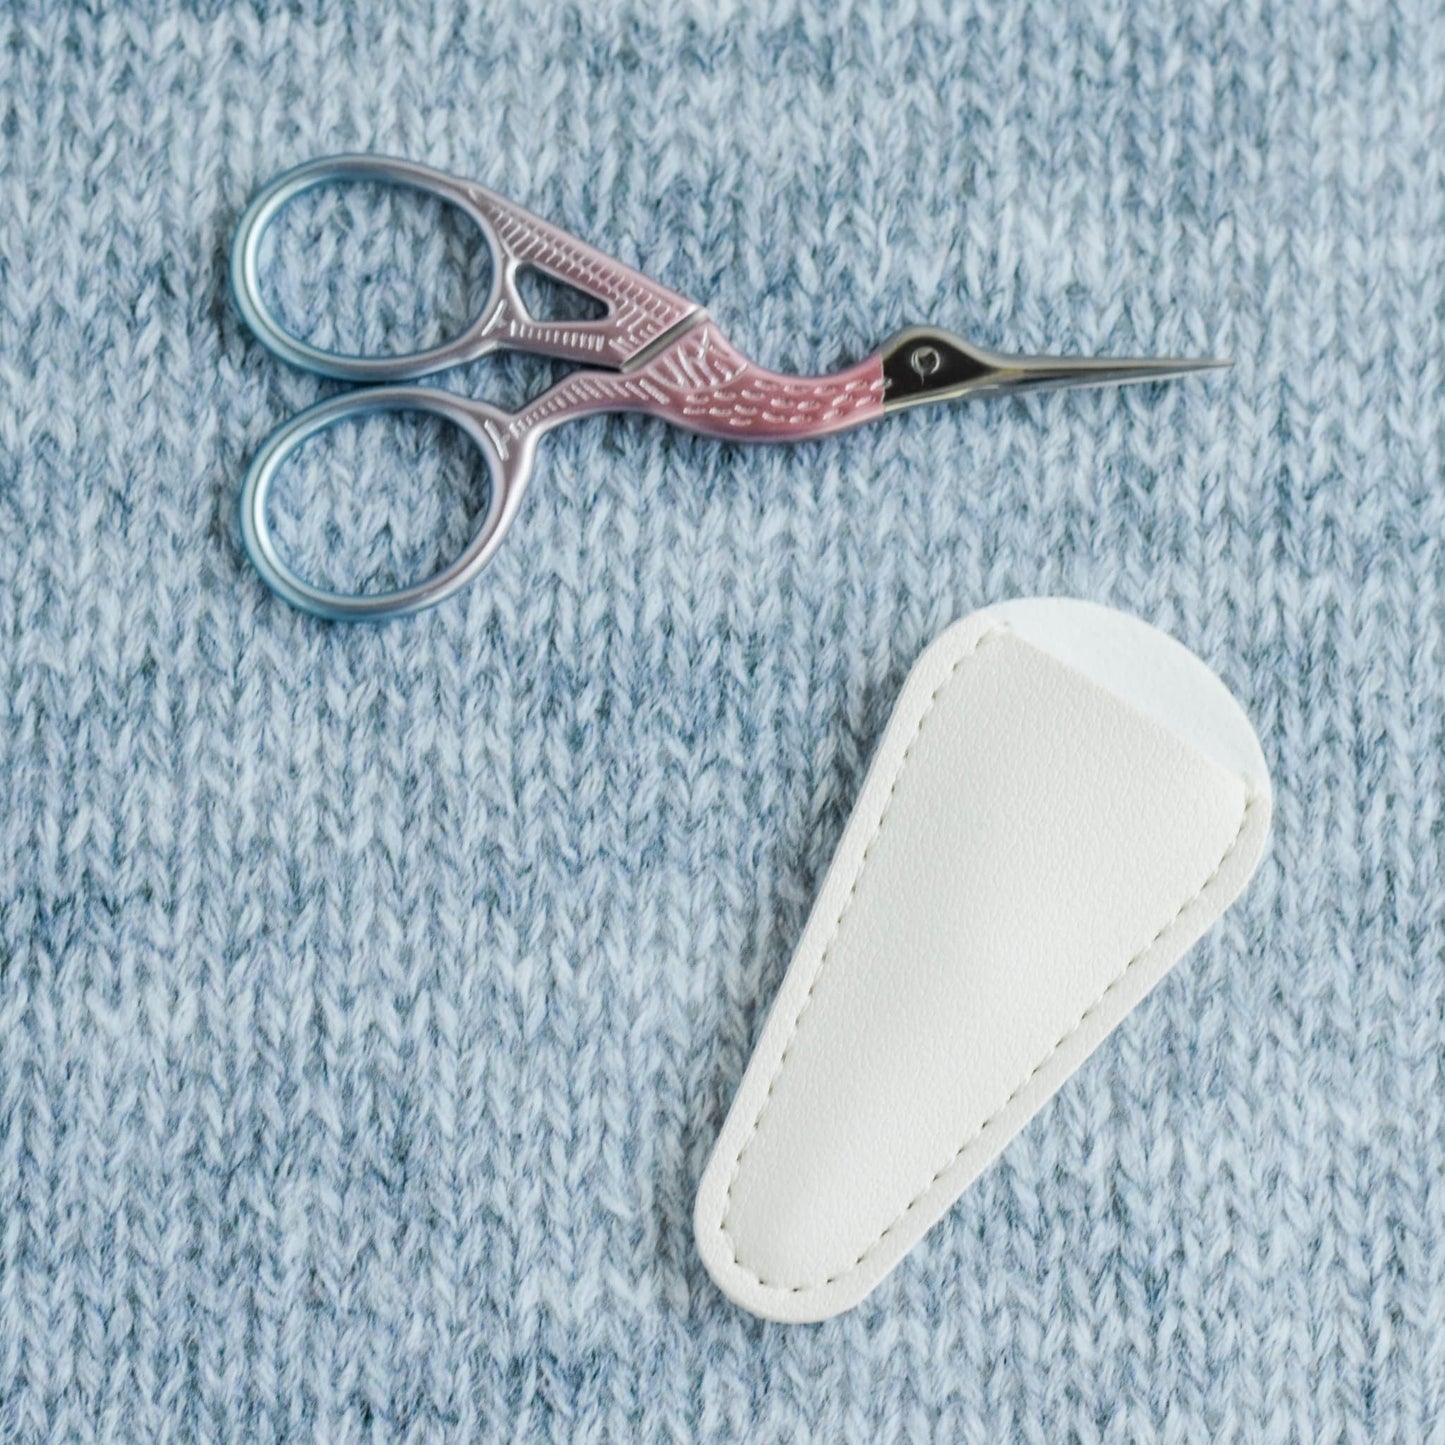 Pink & Blue stork scissor, Knit Scissors, embroidery scissor, cross stitch accessory, embroidery accessory, Stainless Steel, Cover